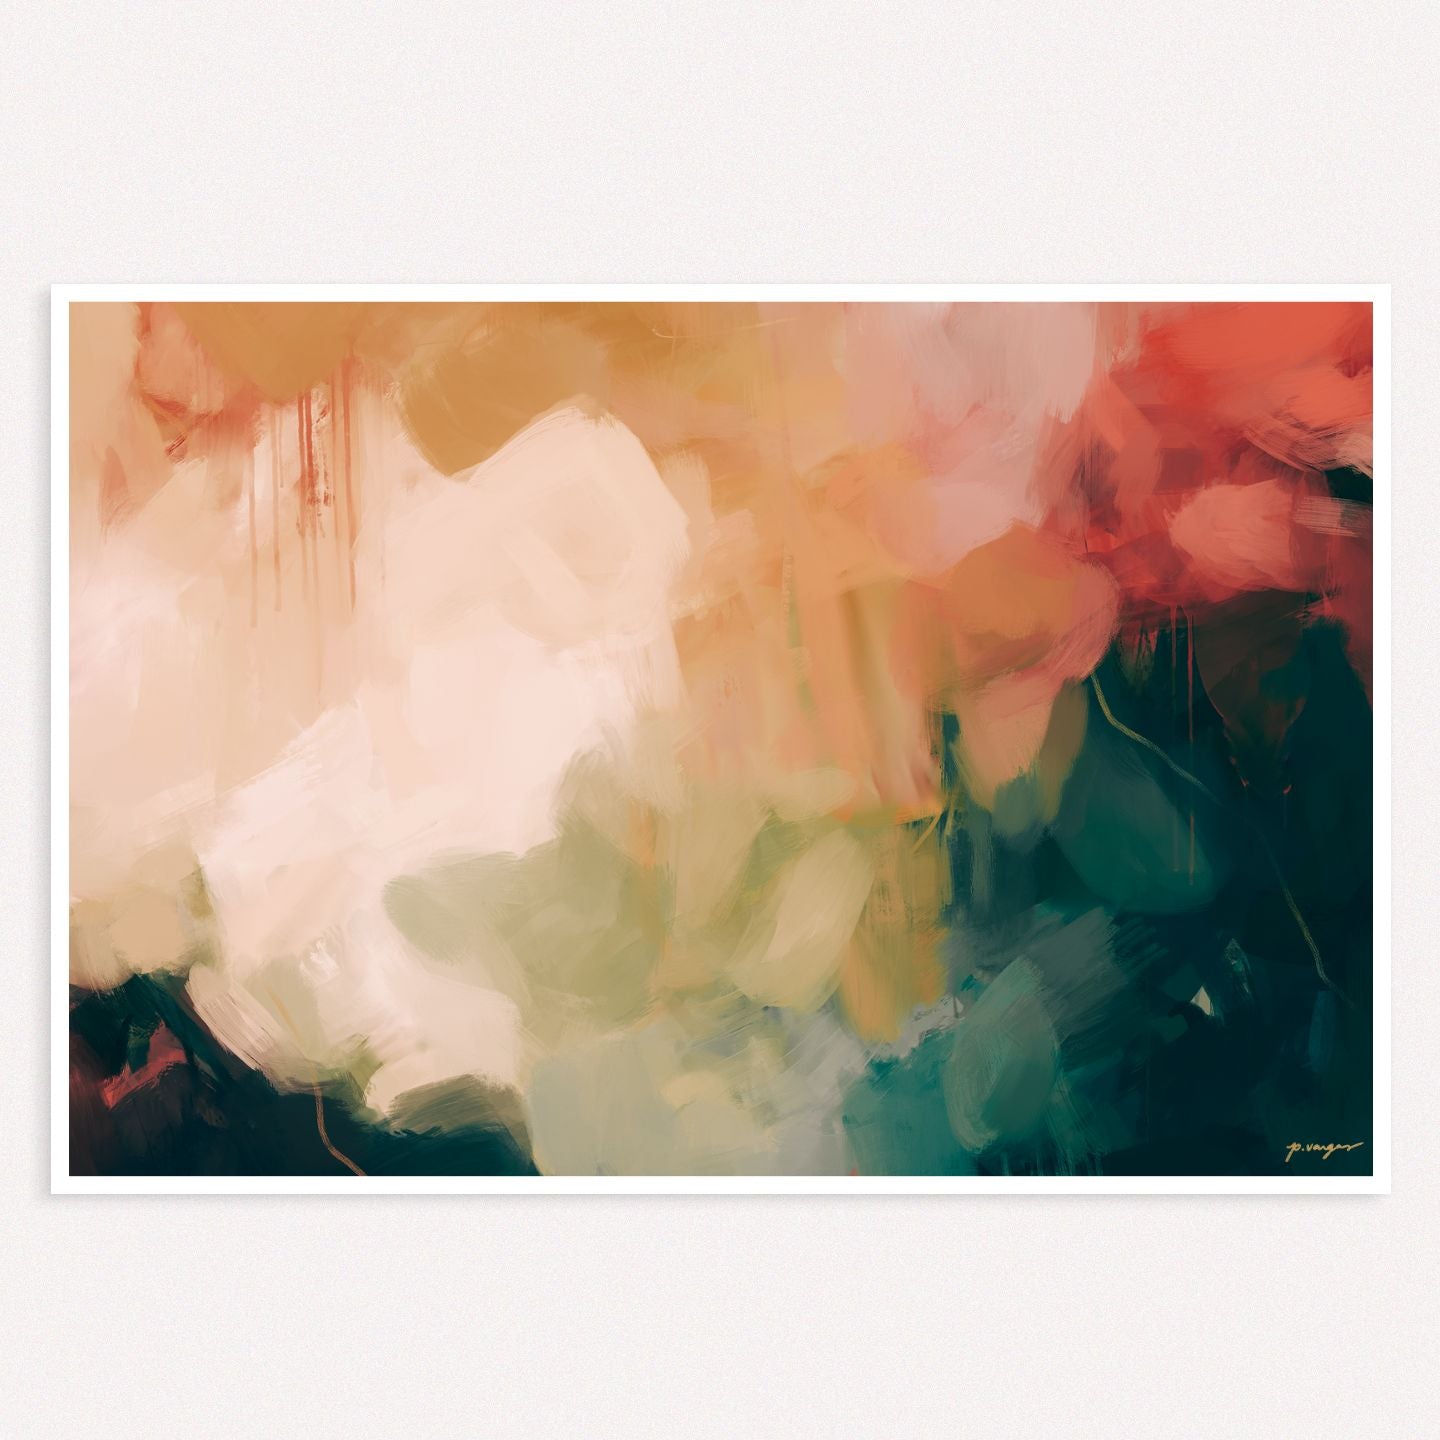 Eventide, green and gold colorful abstract wall art print by Parima Studio